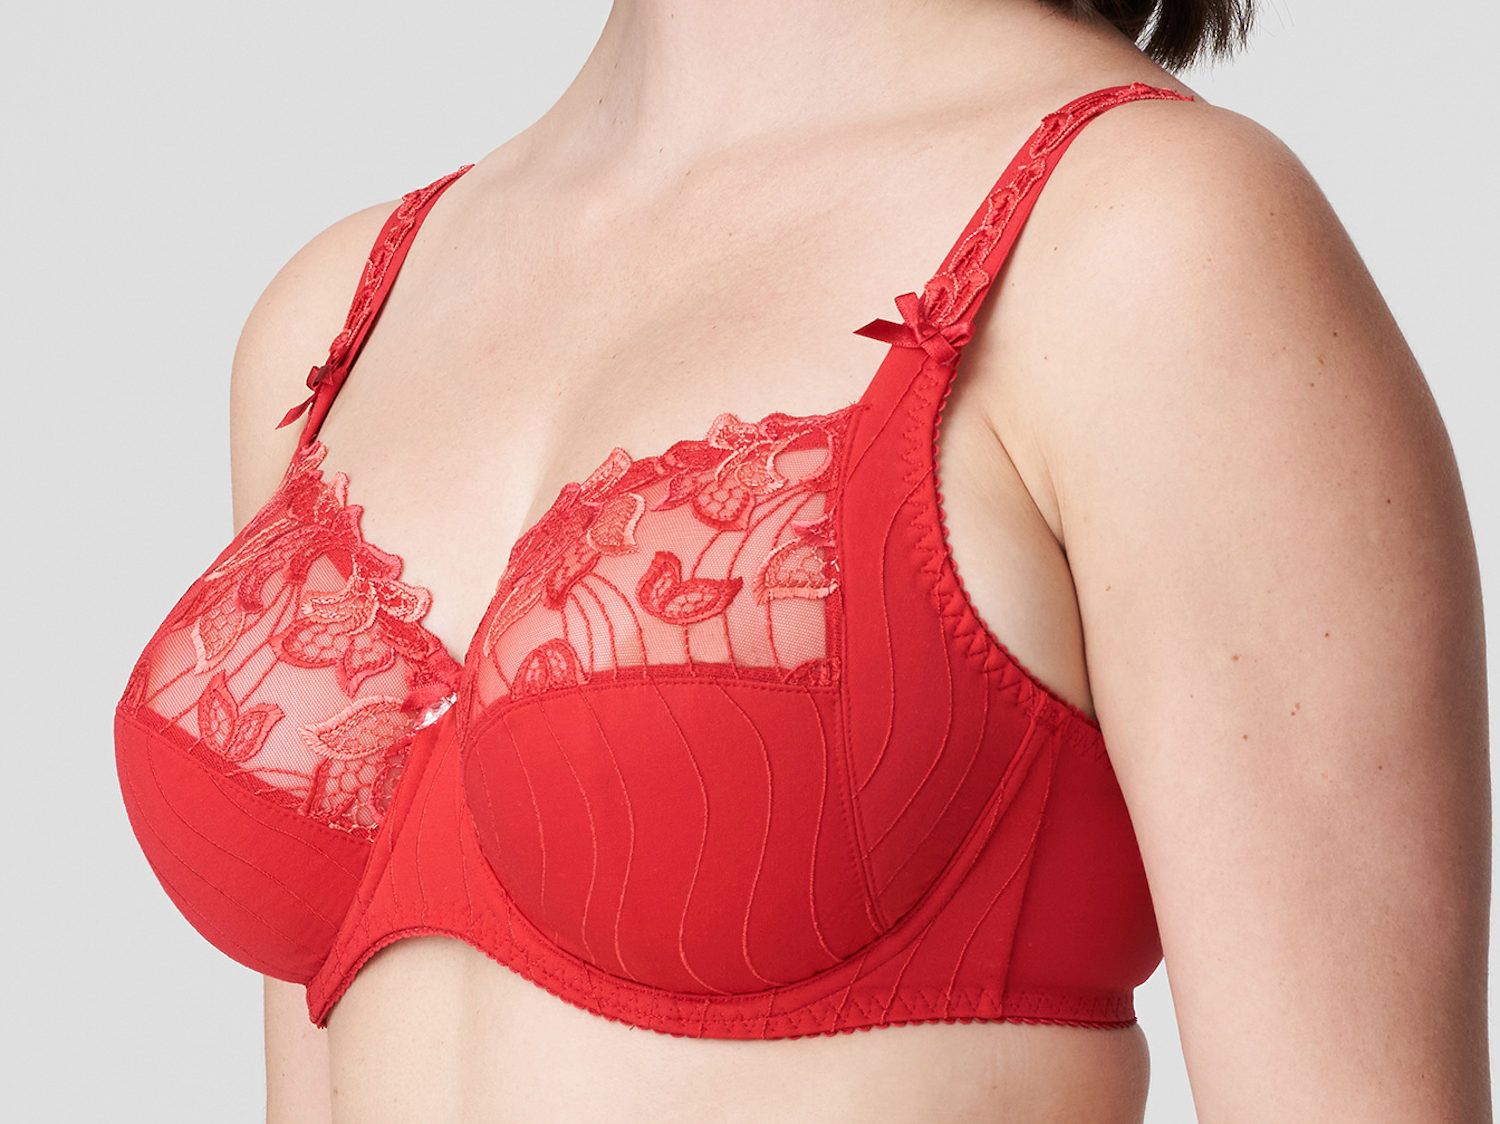 PrimaDonna DEAUVILLE Amour full cup bra